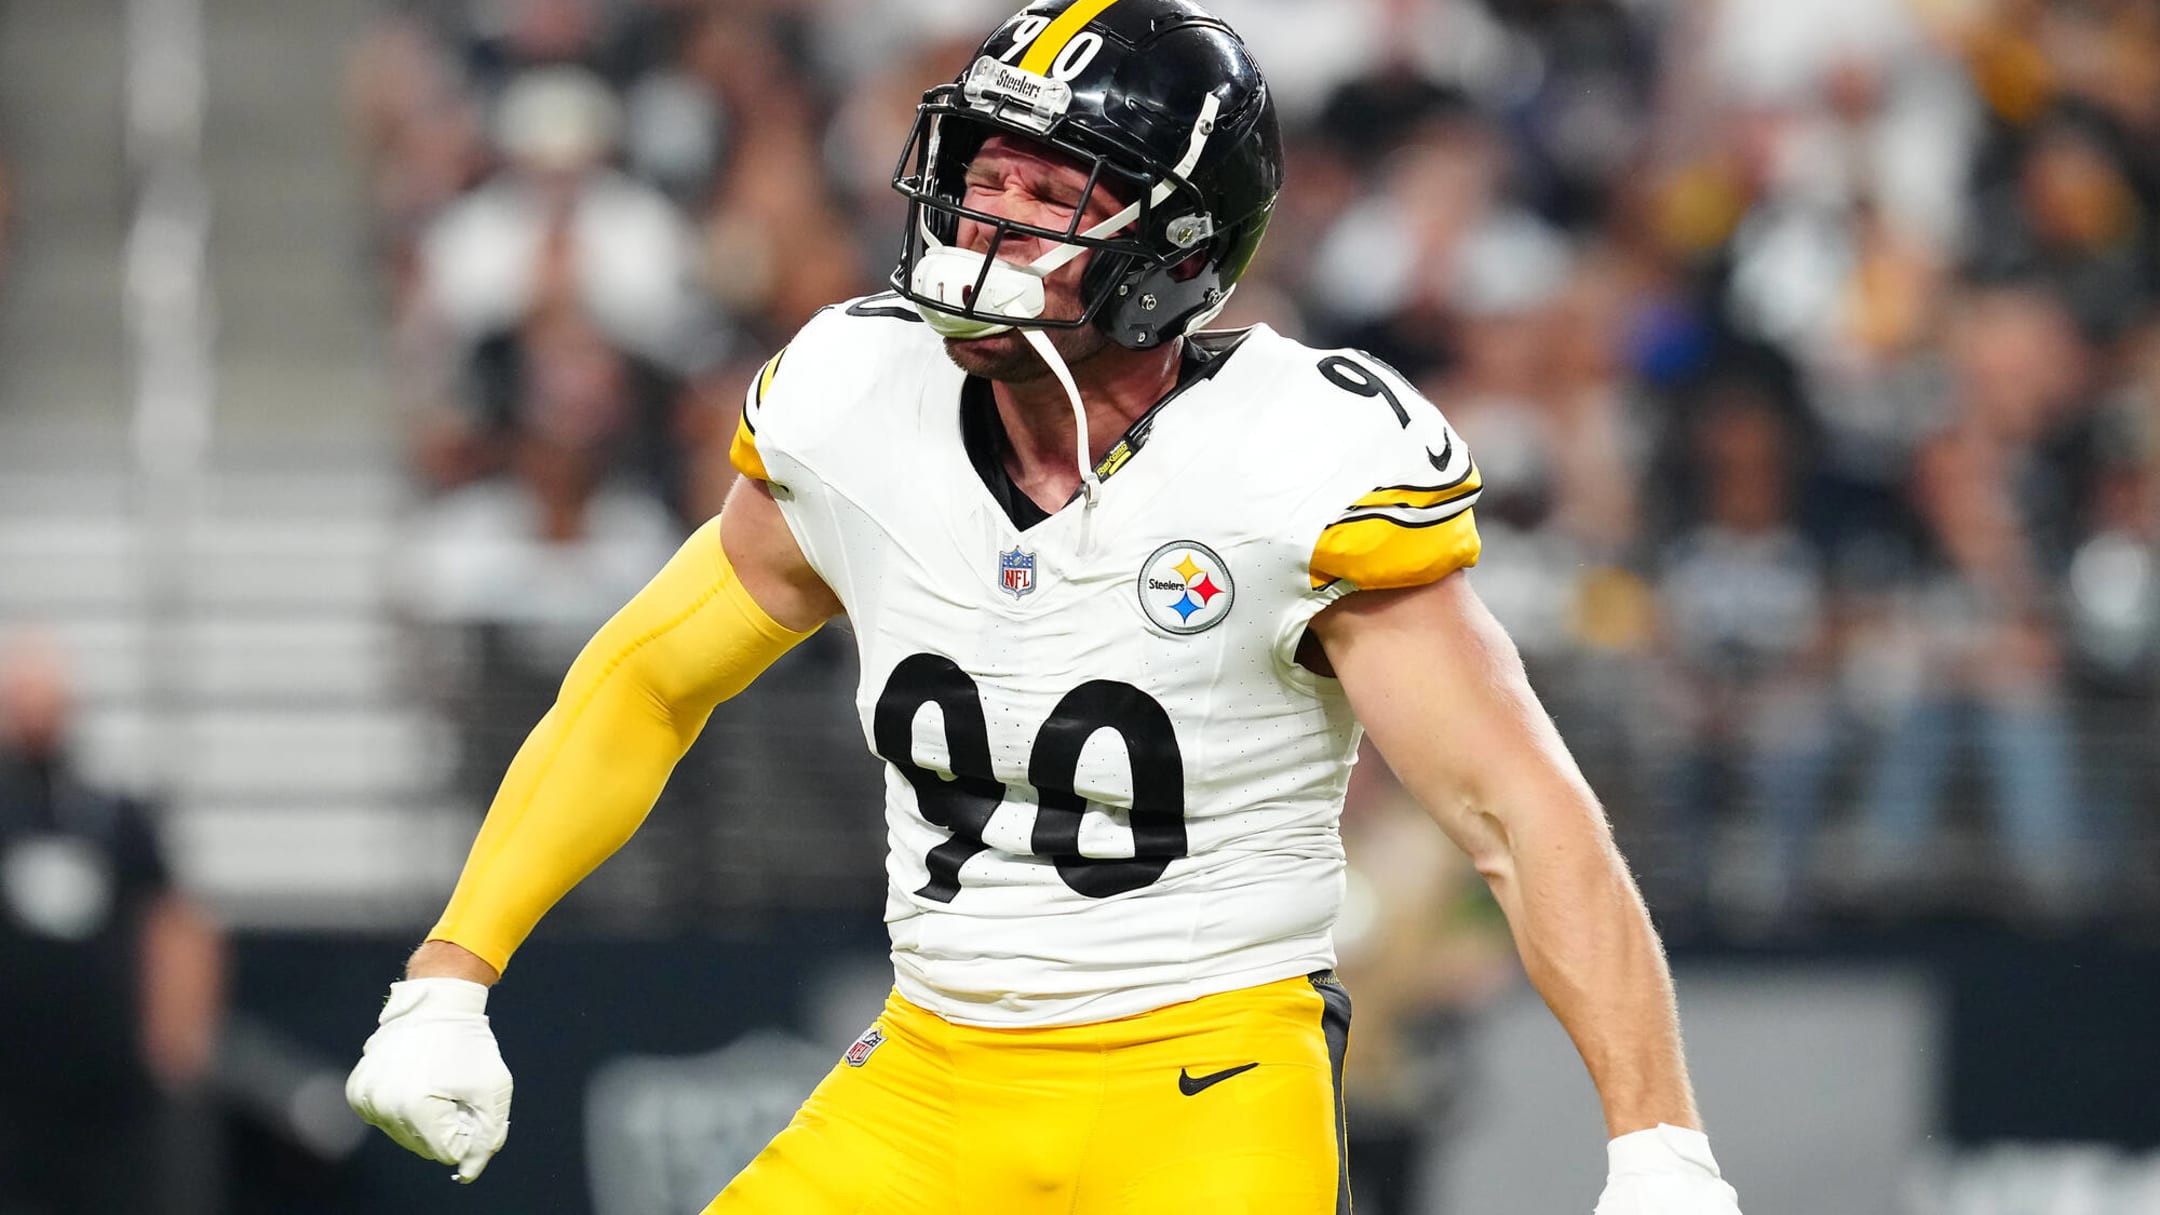 Steelers: T.J. Watt named AFC Defensive Player of the Month